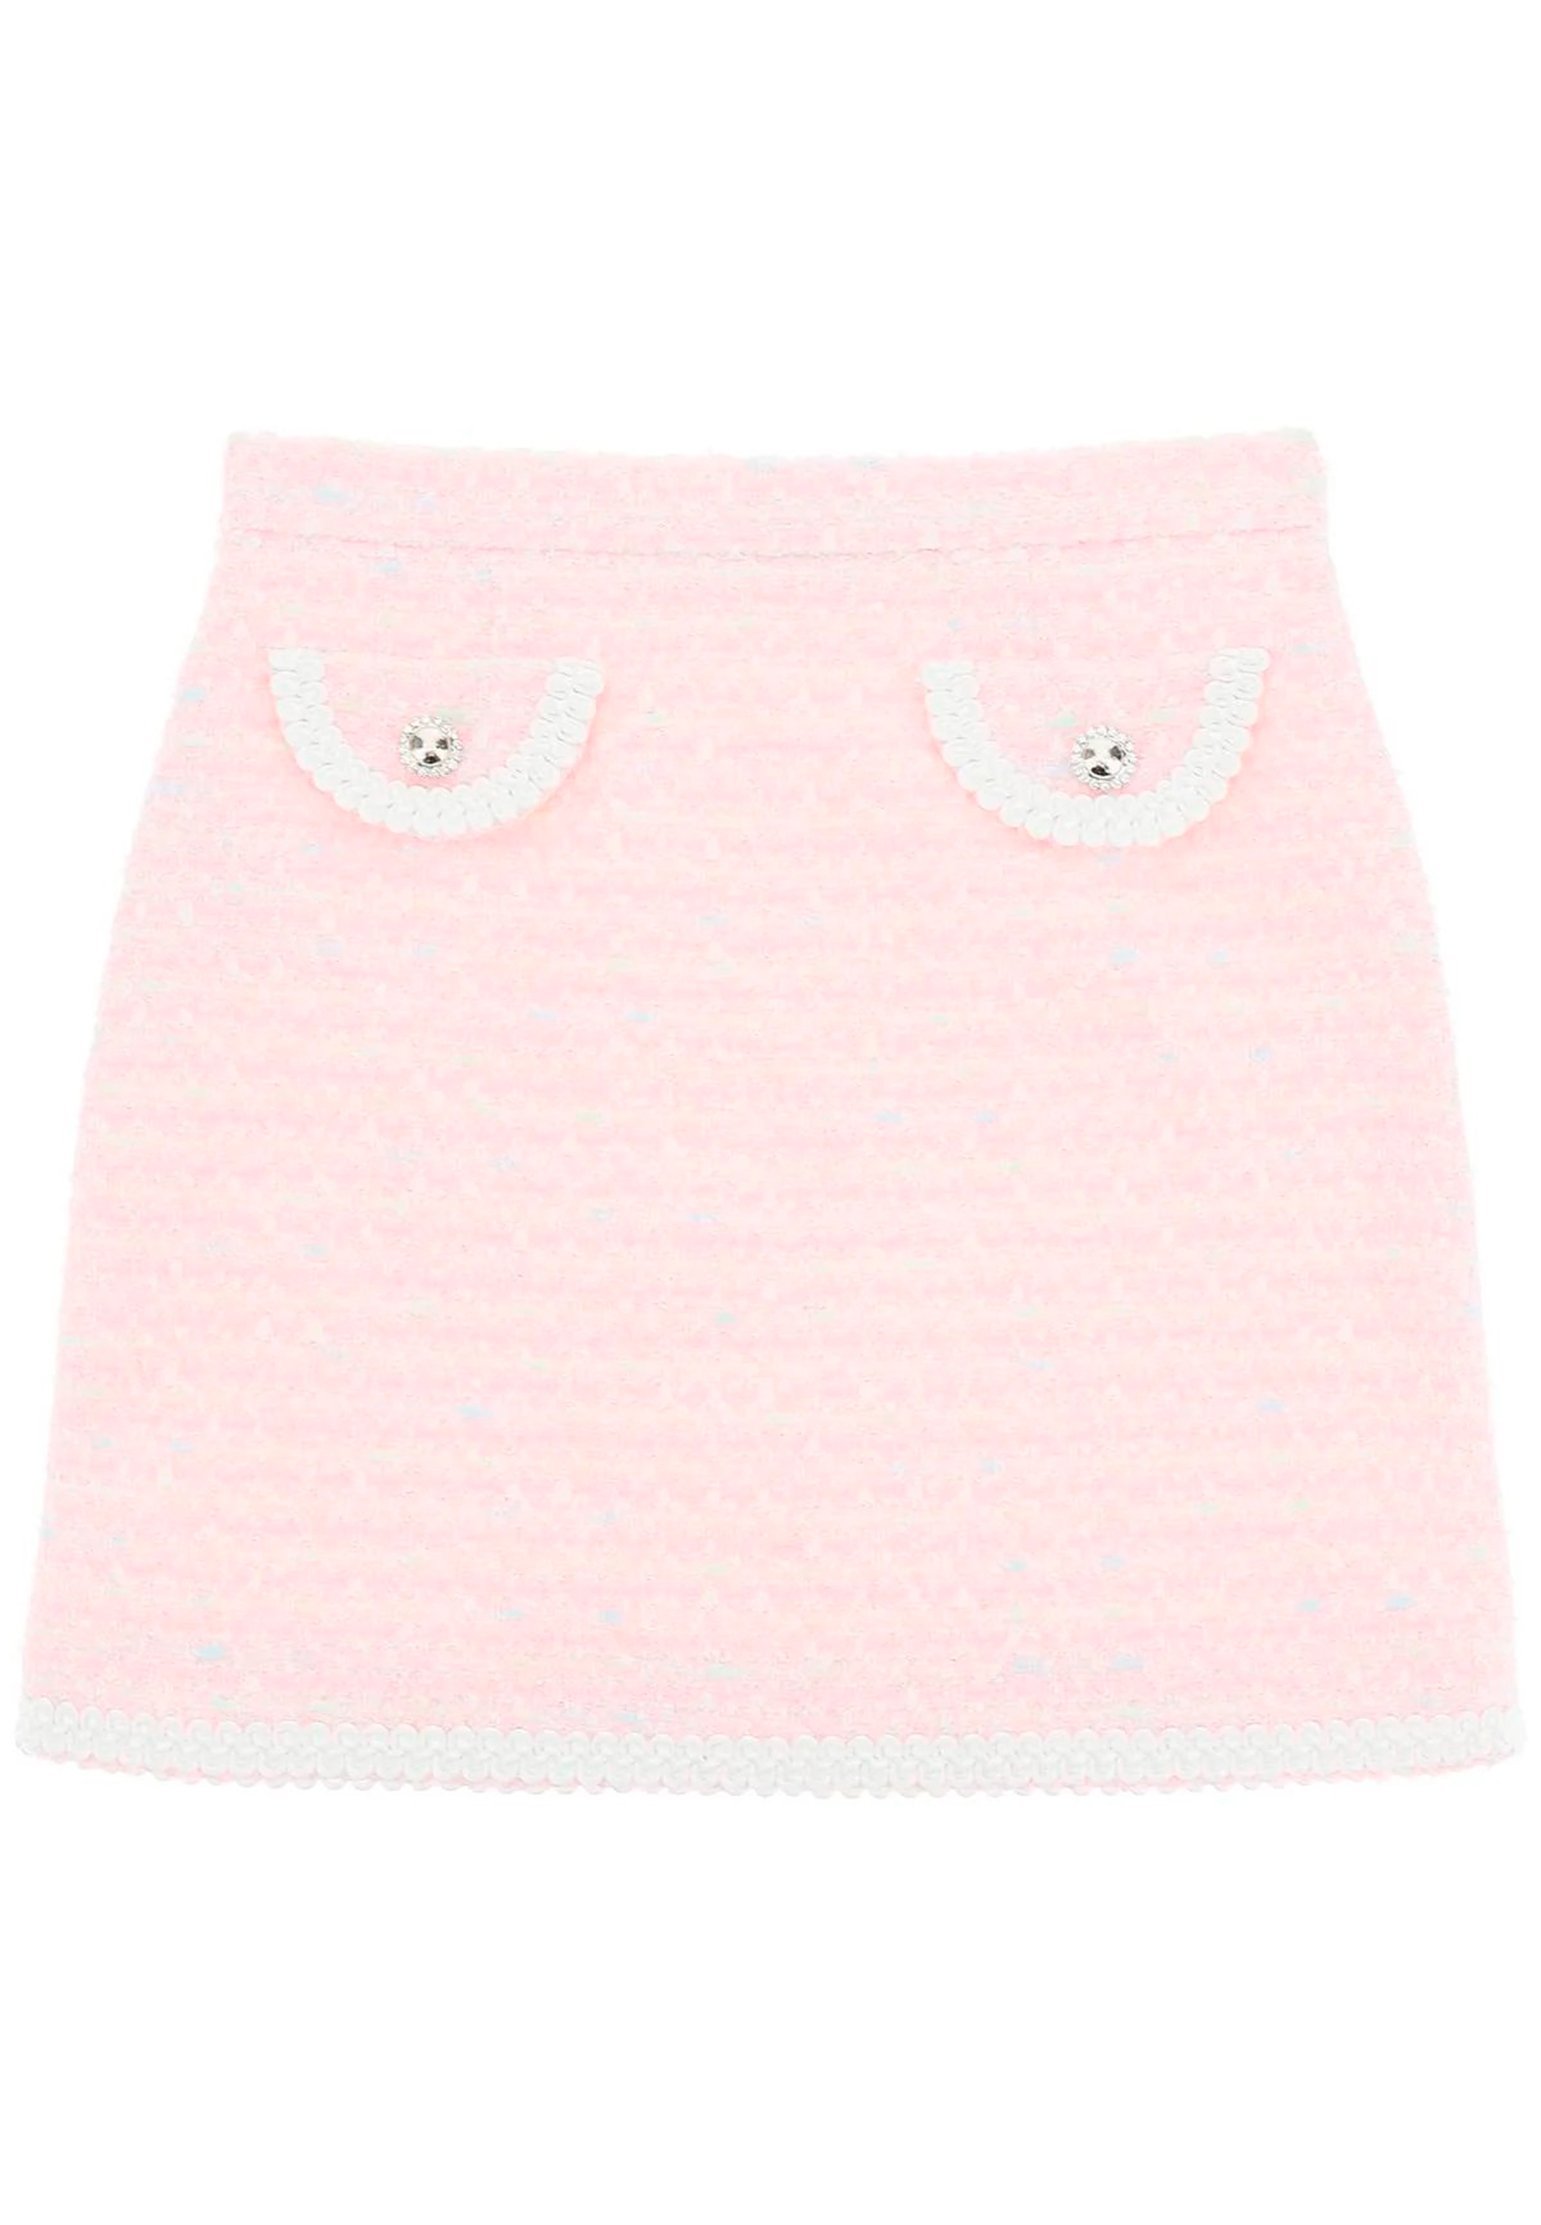 Skirt ALESSANDRA RICH Color: pink (Code: 1985) in online store Allure